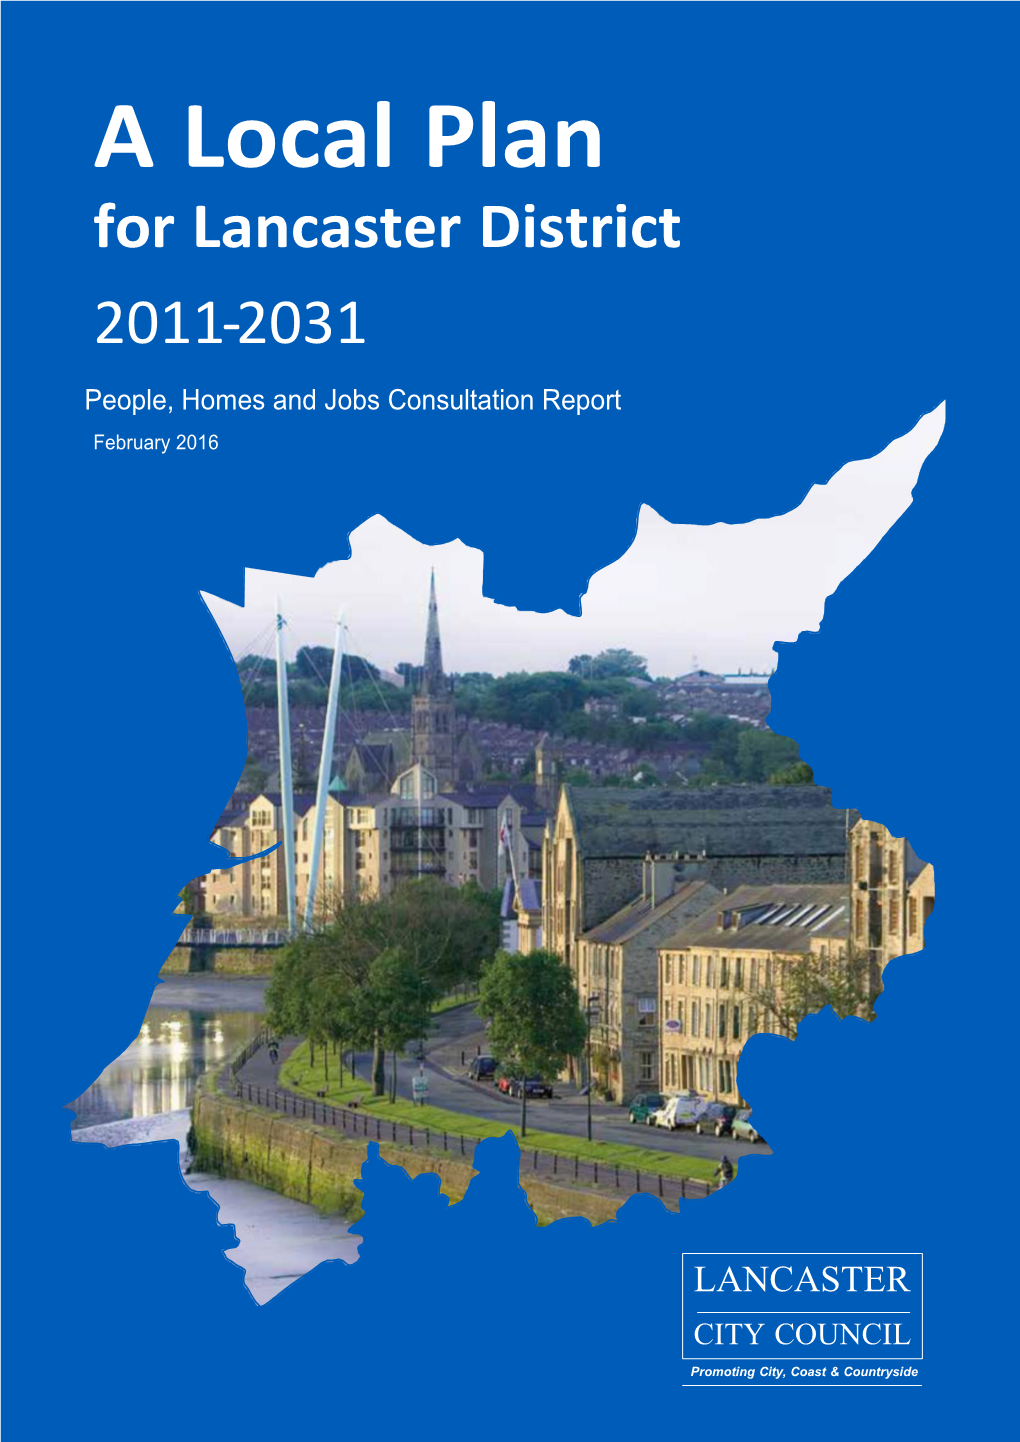 A Local Plan for Lancaster District 2011-2031 People, Homes and Jobs Consultation Report February 2016